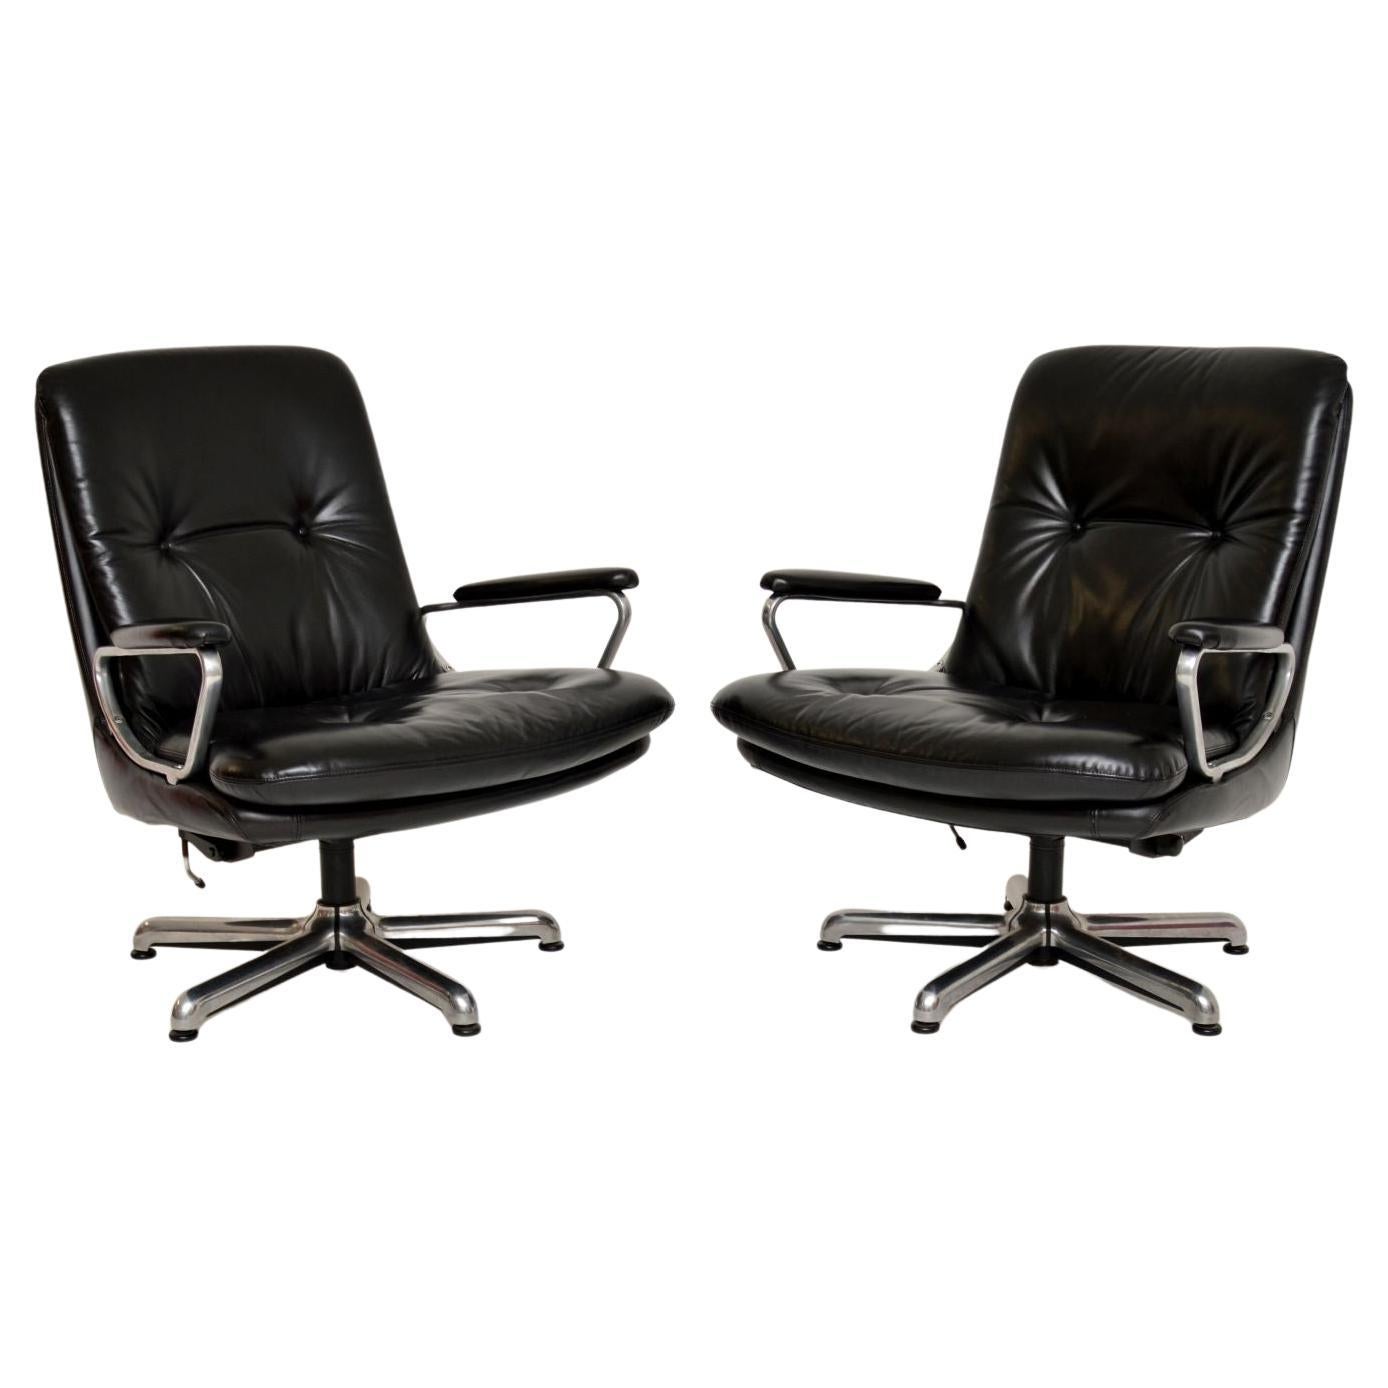 1960's Pair of Leather & Chrome Armchairs by Andre Vandenbeuk for Strassle